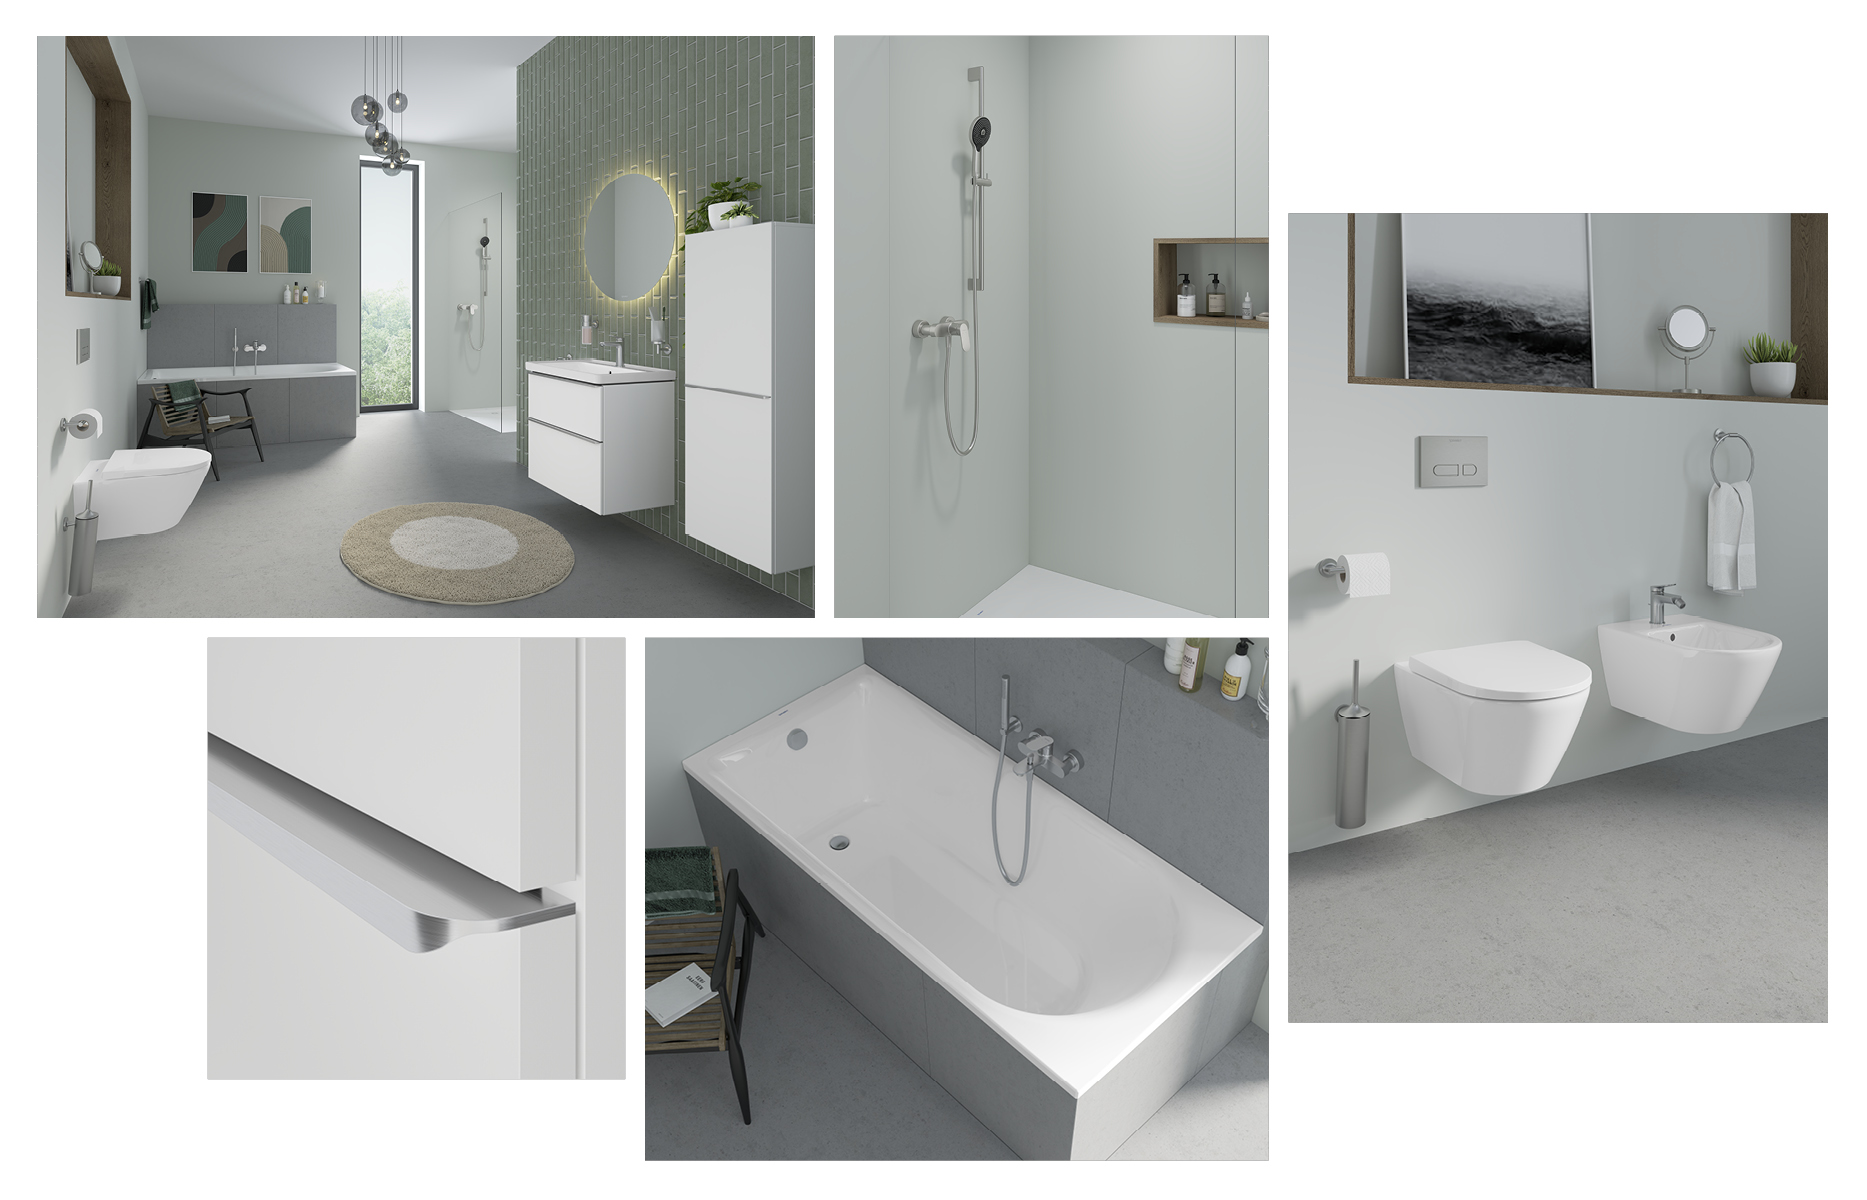 Duravit bathroom furniture with faucet and accessories in brushed stainless steel
